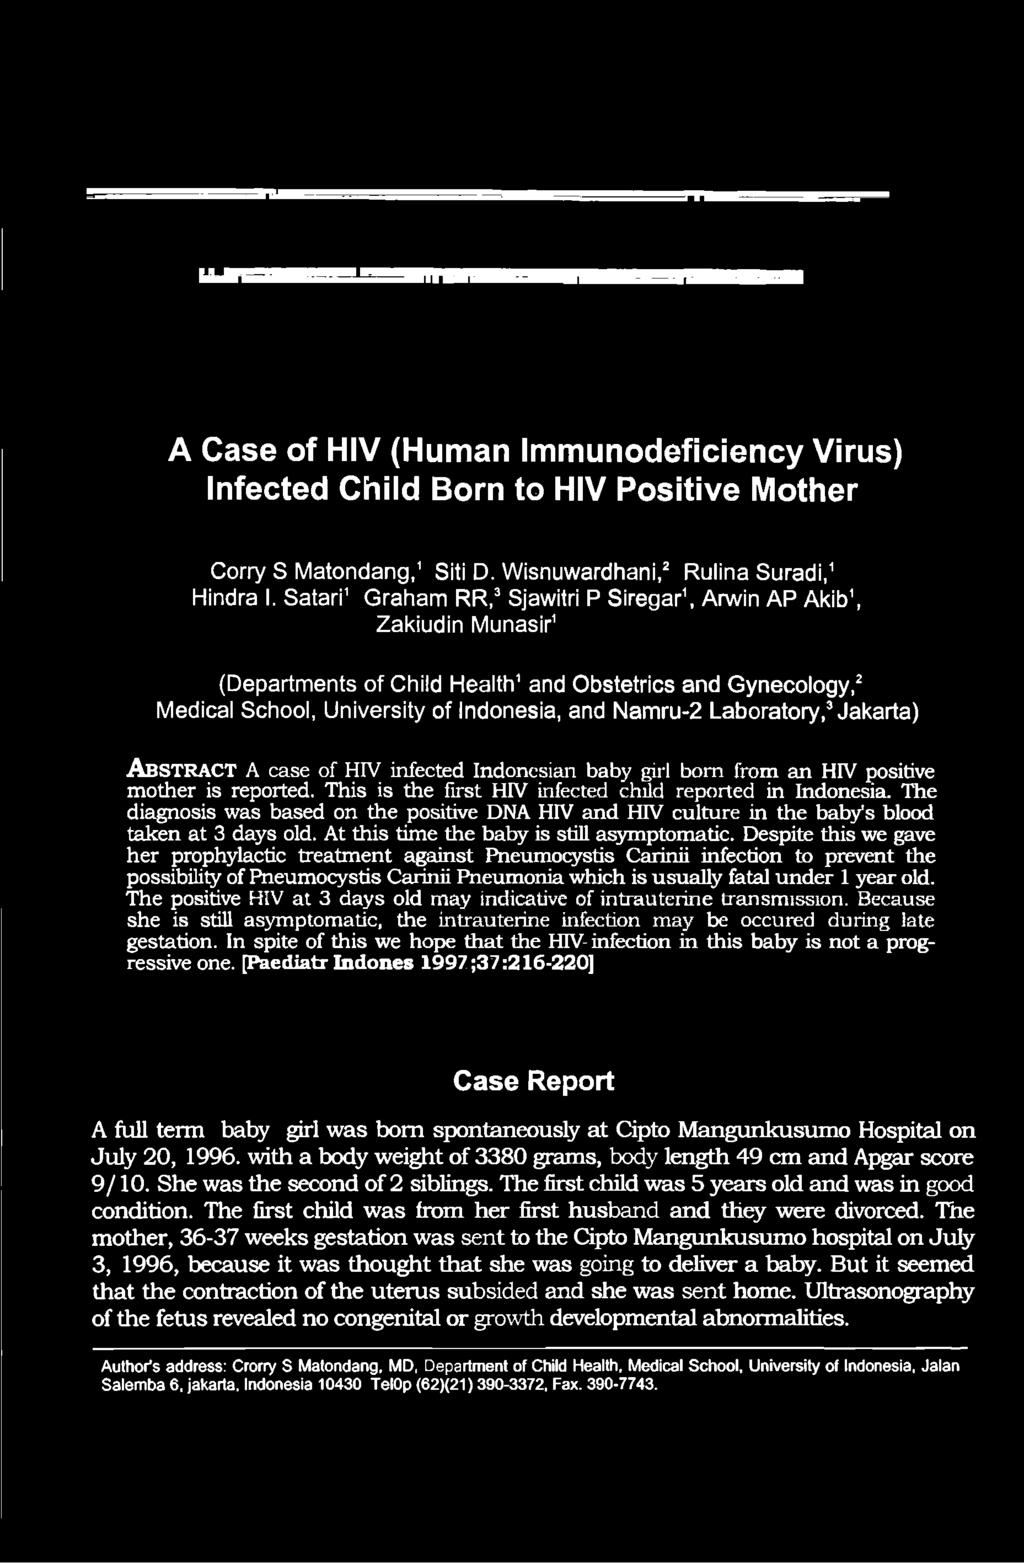 Laboratory,3Jakarta) ABSTRACT a case of HIV infected Indonesian baby girl bom from an HIV positive mother is reported. This is the first HIV infected child reported in Indonesia.